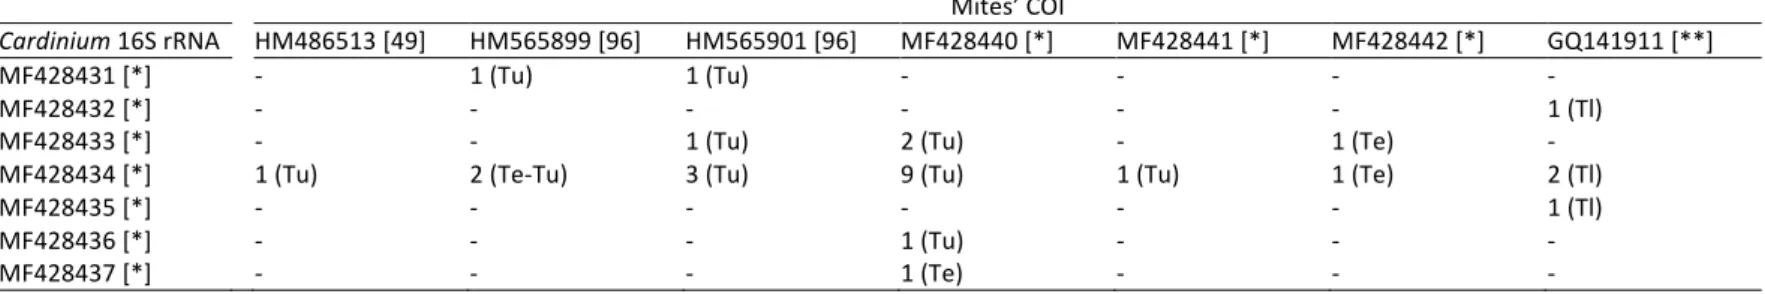 Table 4. Co-occurrence of Cardinium 16S rRNA and mitochondrial COI alleles of spider mites